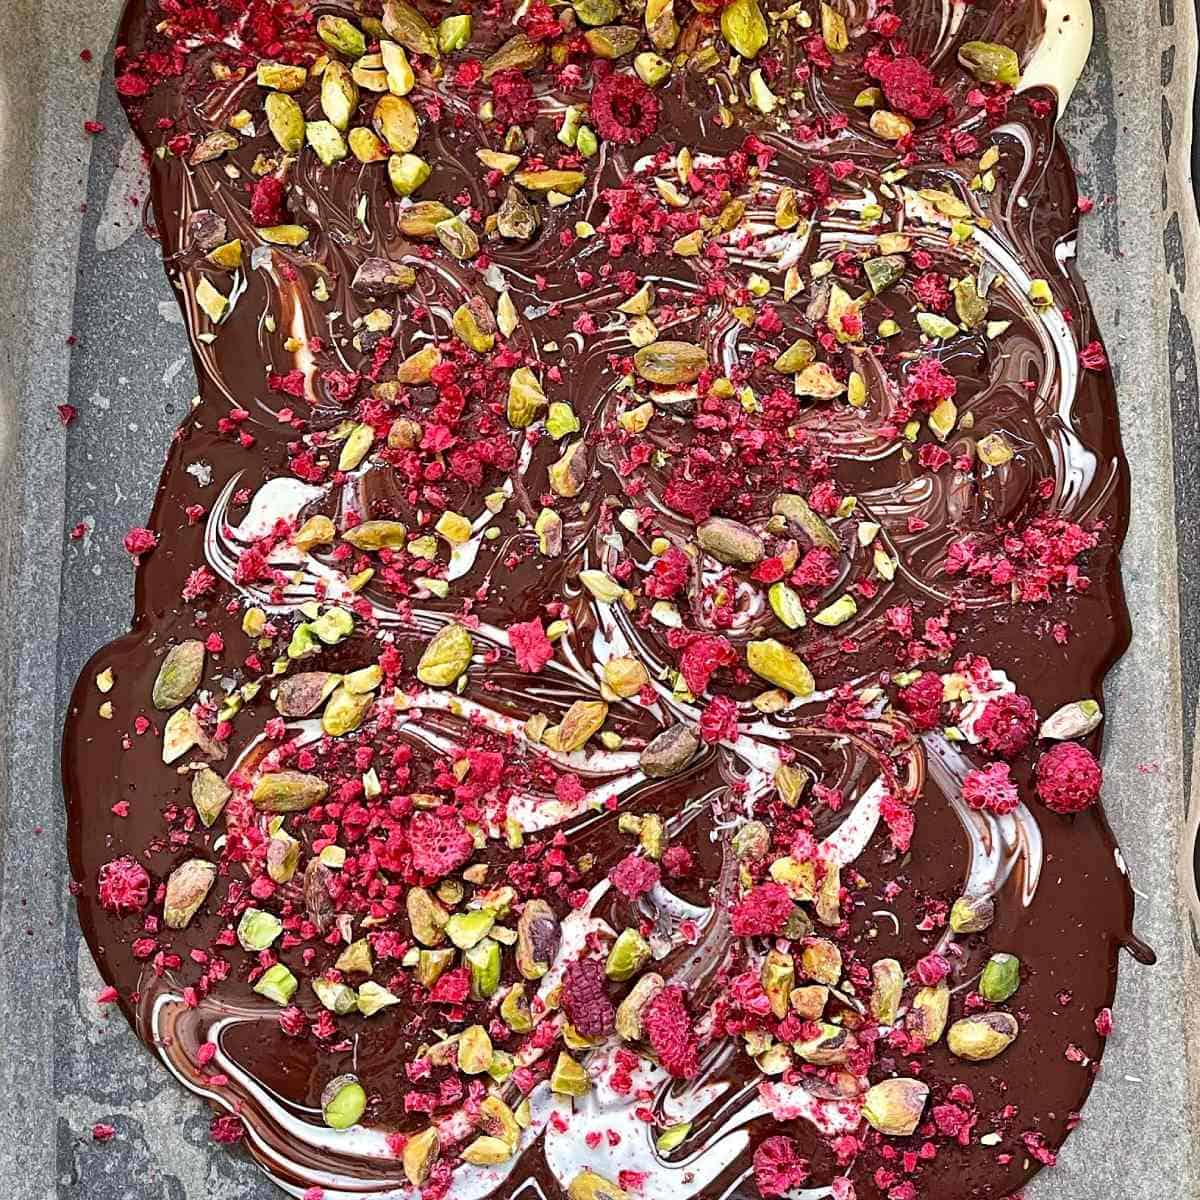 Chocolate bark on a lined baking tray ready to set.